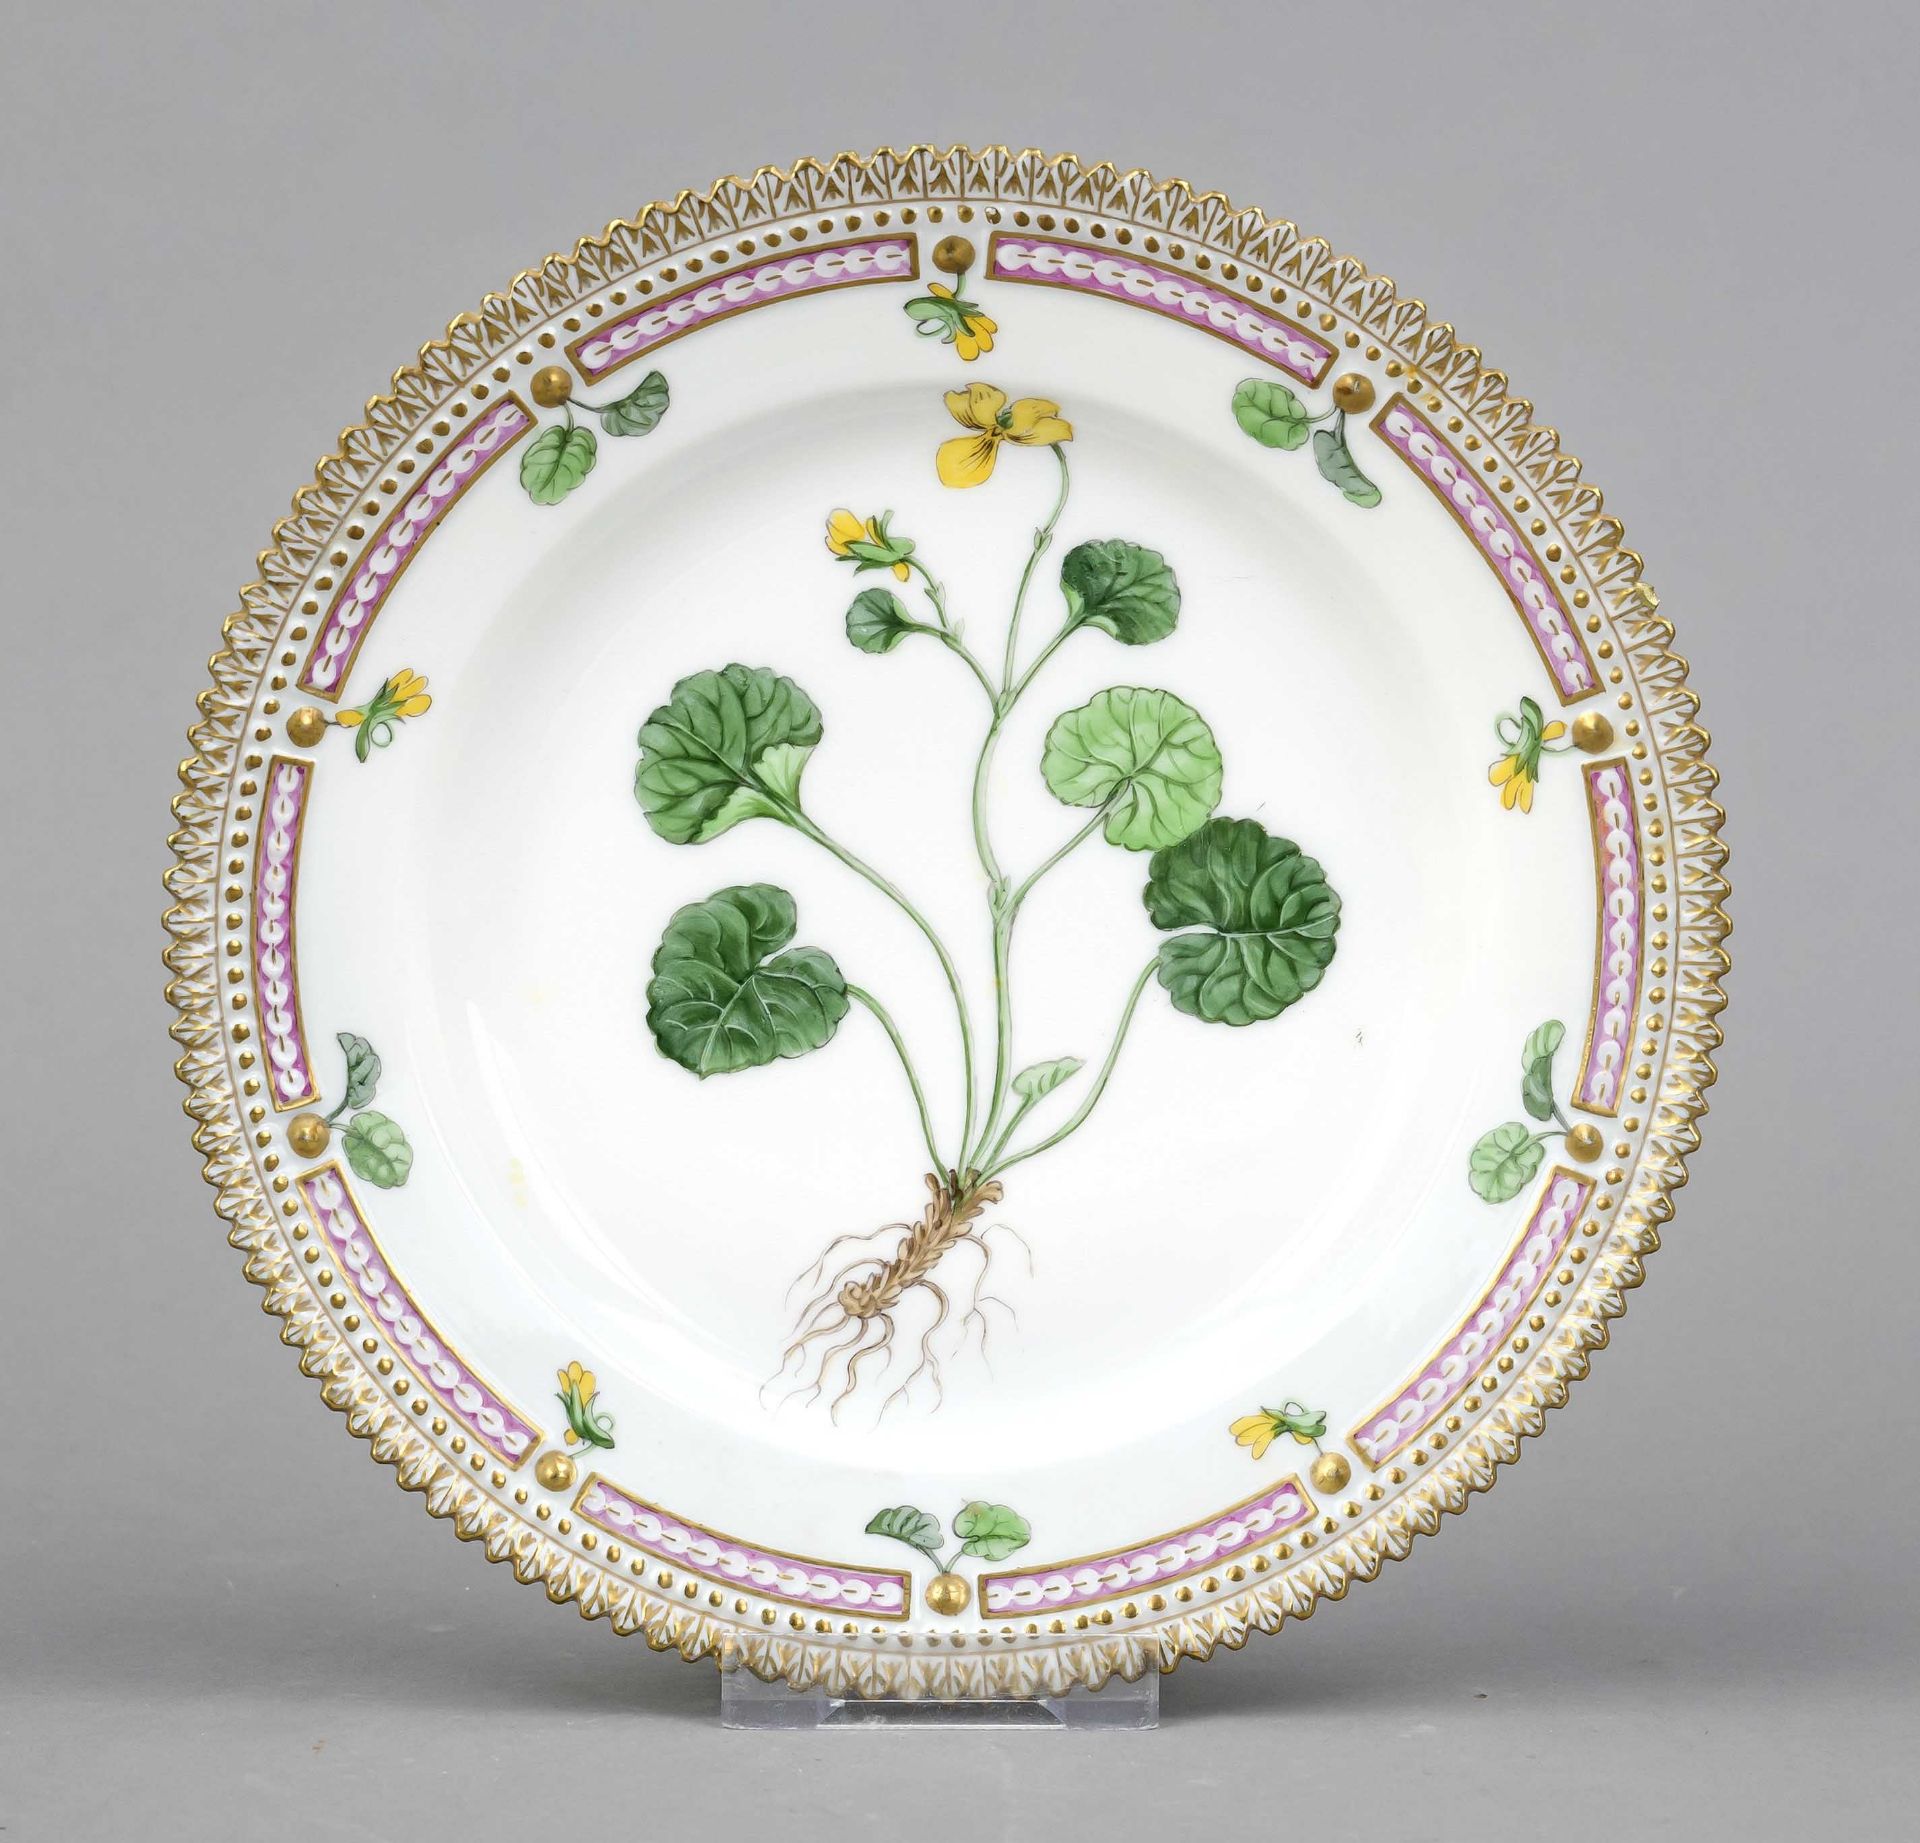 Small plate, Royal Copenhagen, mark 1948, 2nd choice, from the Flora Danica service, designed by